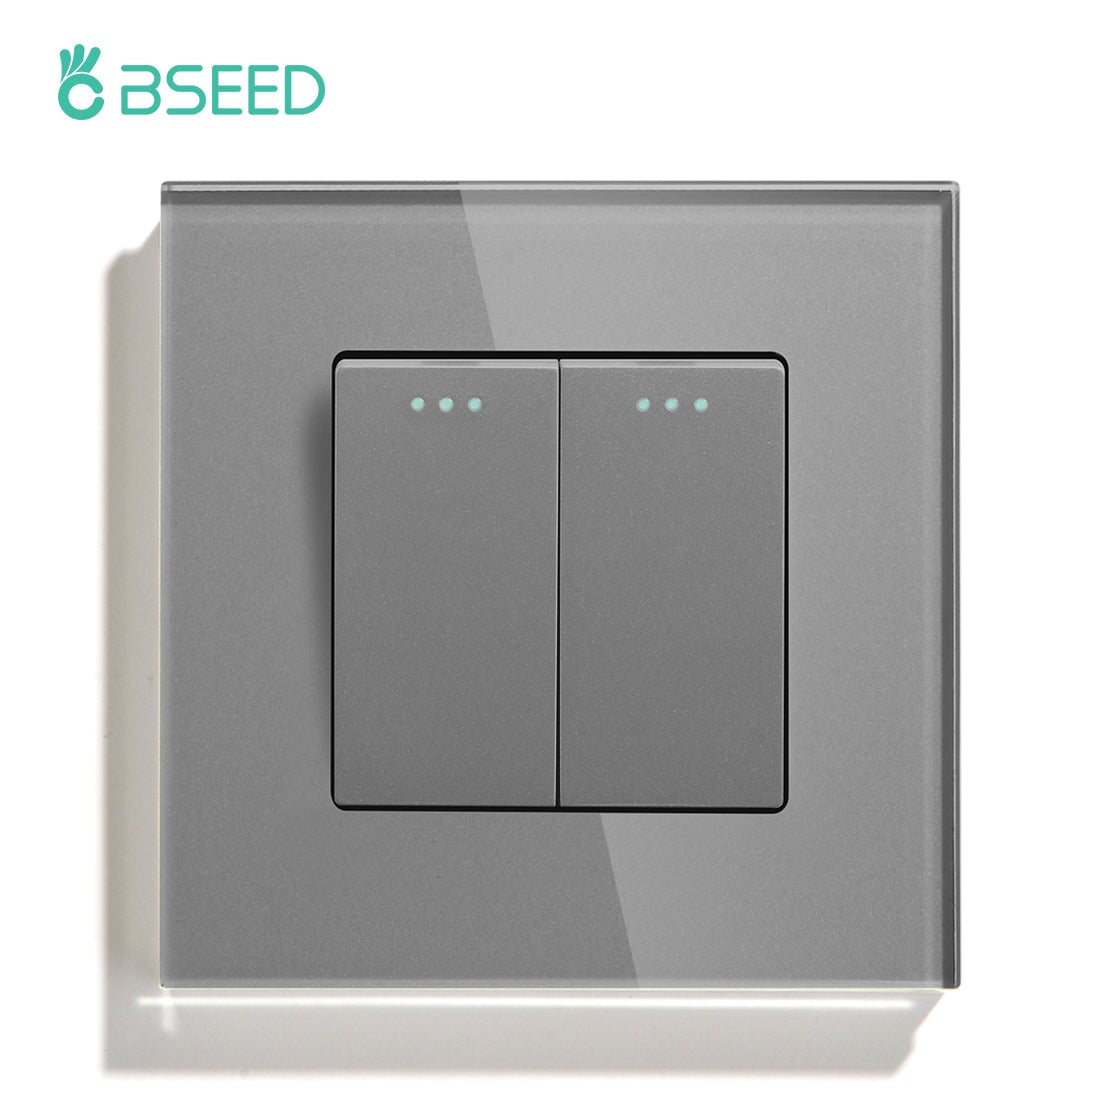 BSEED Wall Switches Automatic Rebound 1/2Gang 1Way Glass Mechanical Light Switches Reset Switches Return to Initial Position Light Switches Bseedswitch Grey 2Gang 